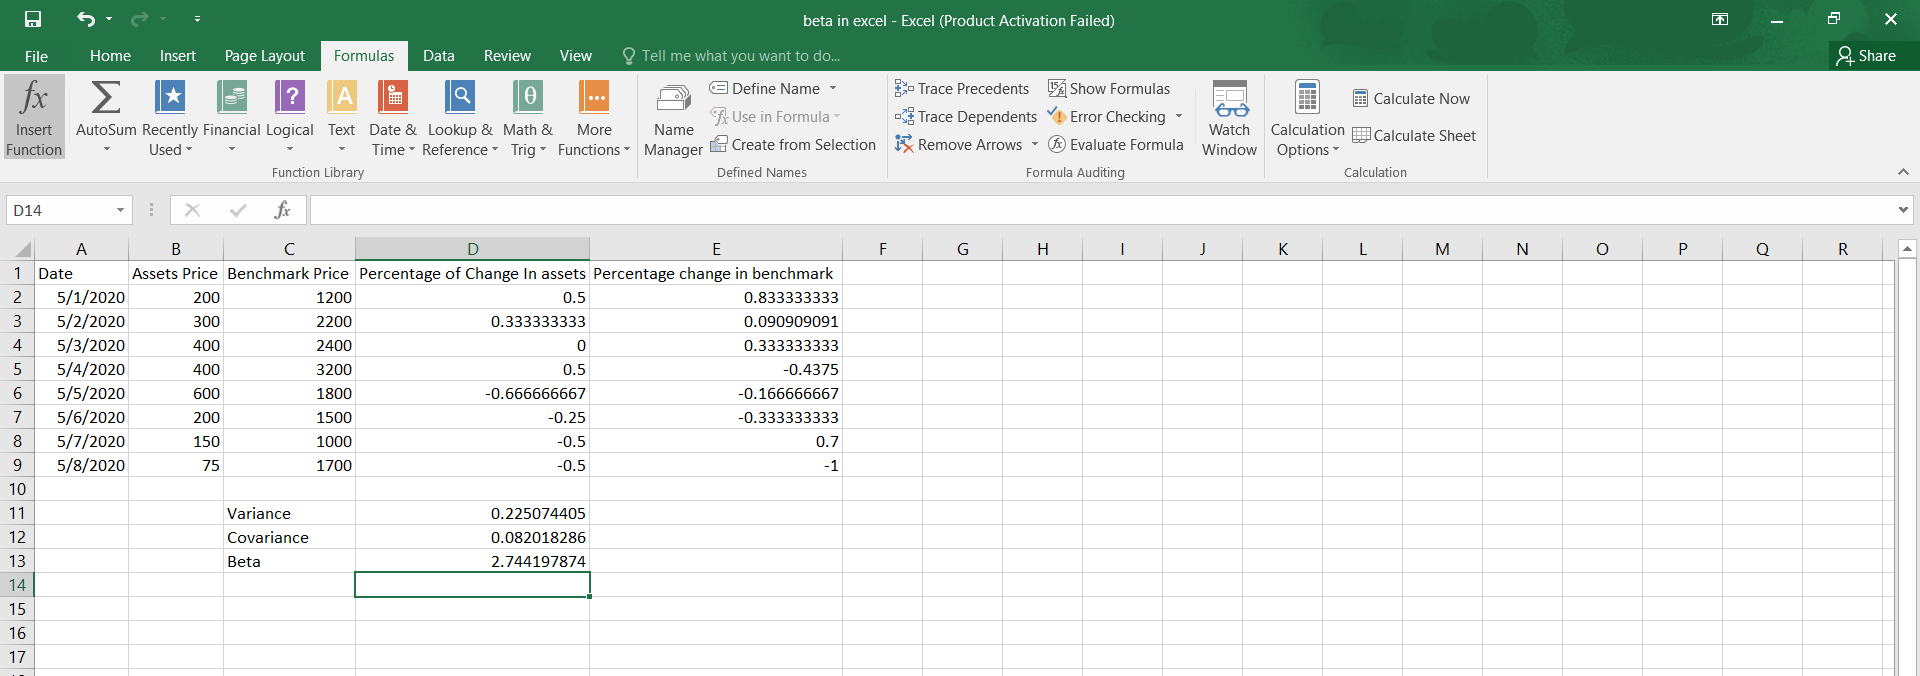 how to calculate beta of a stock in excel